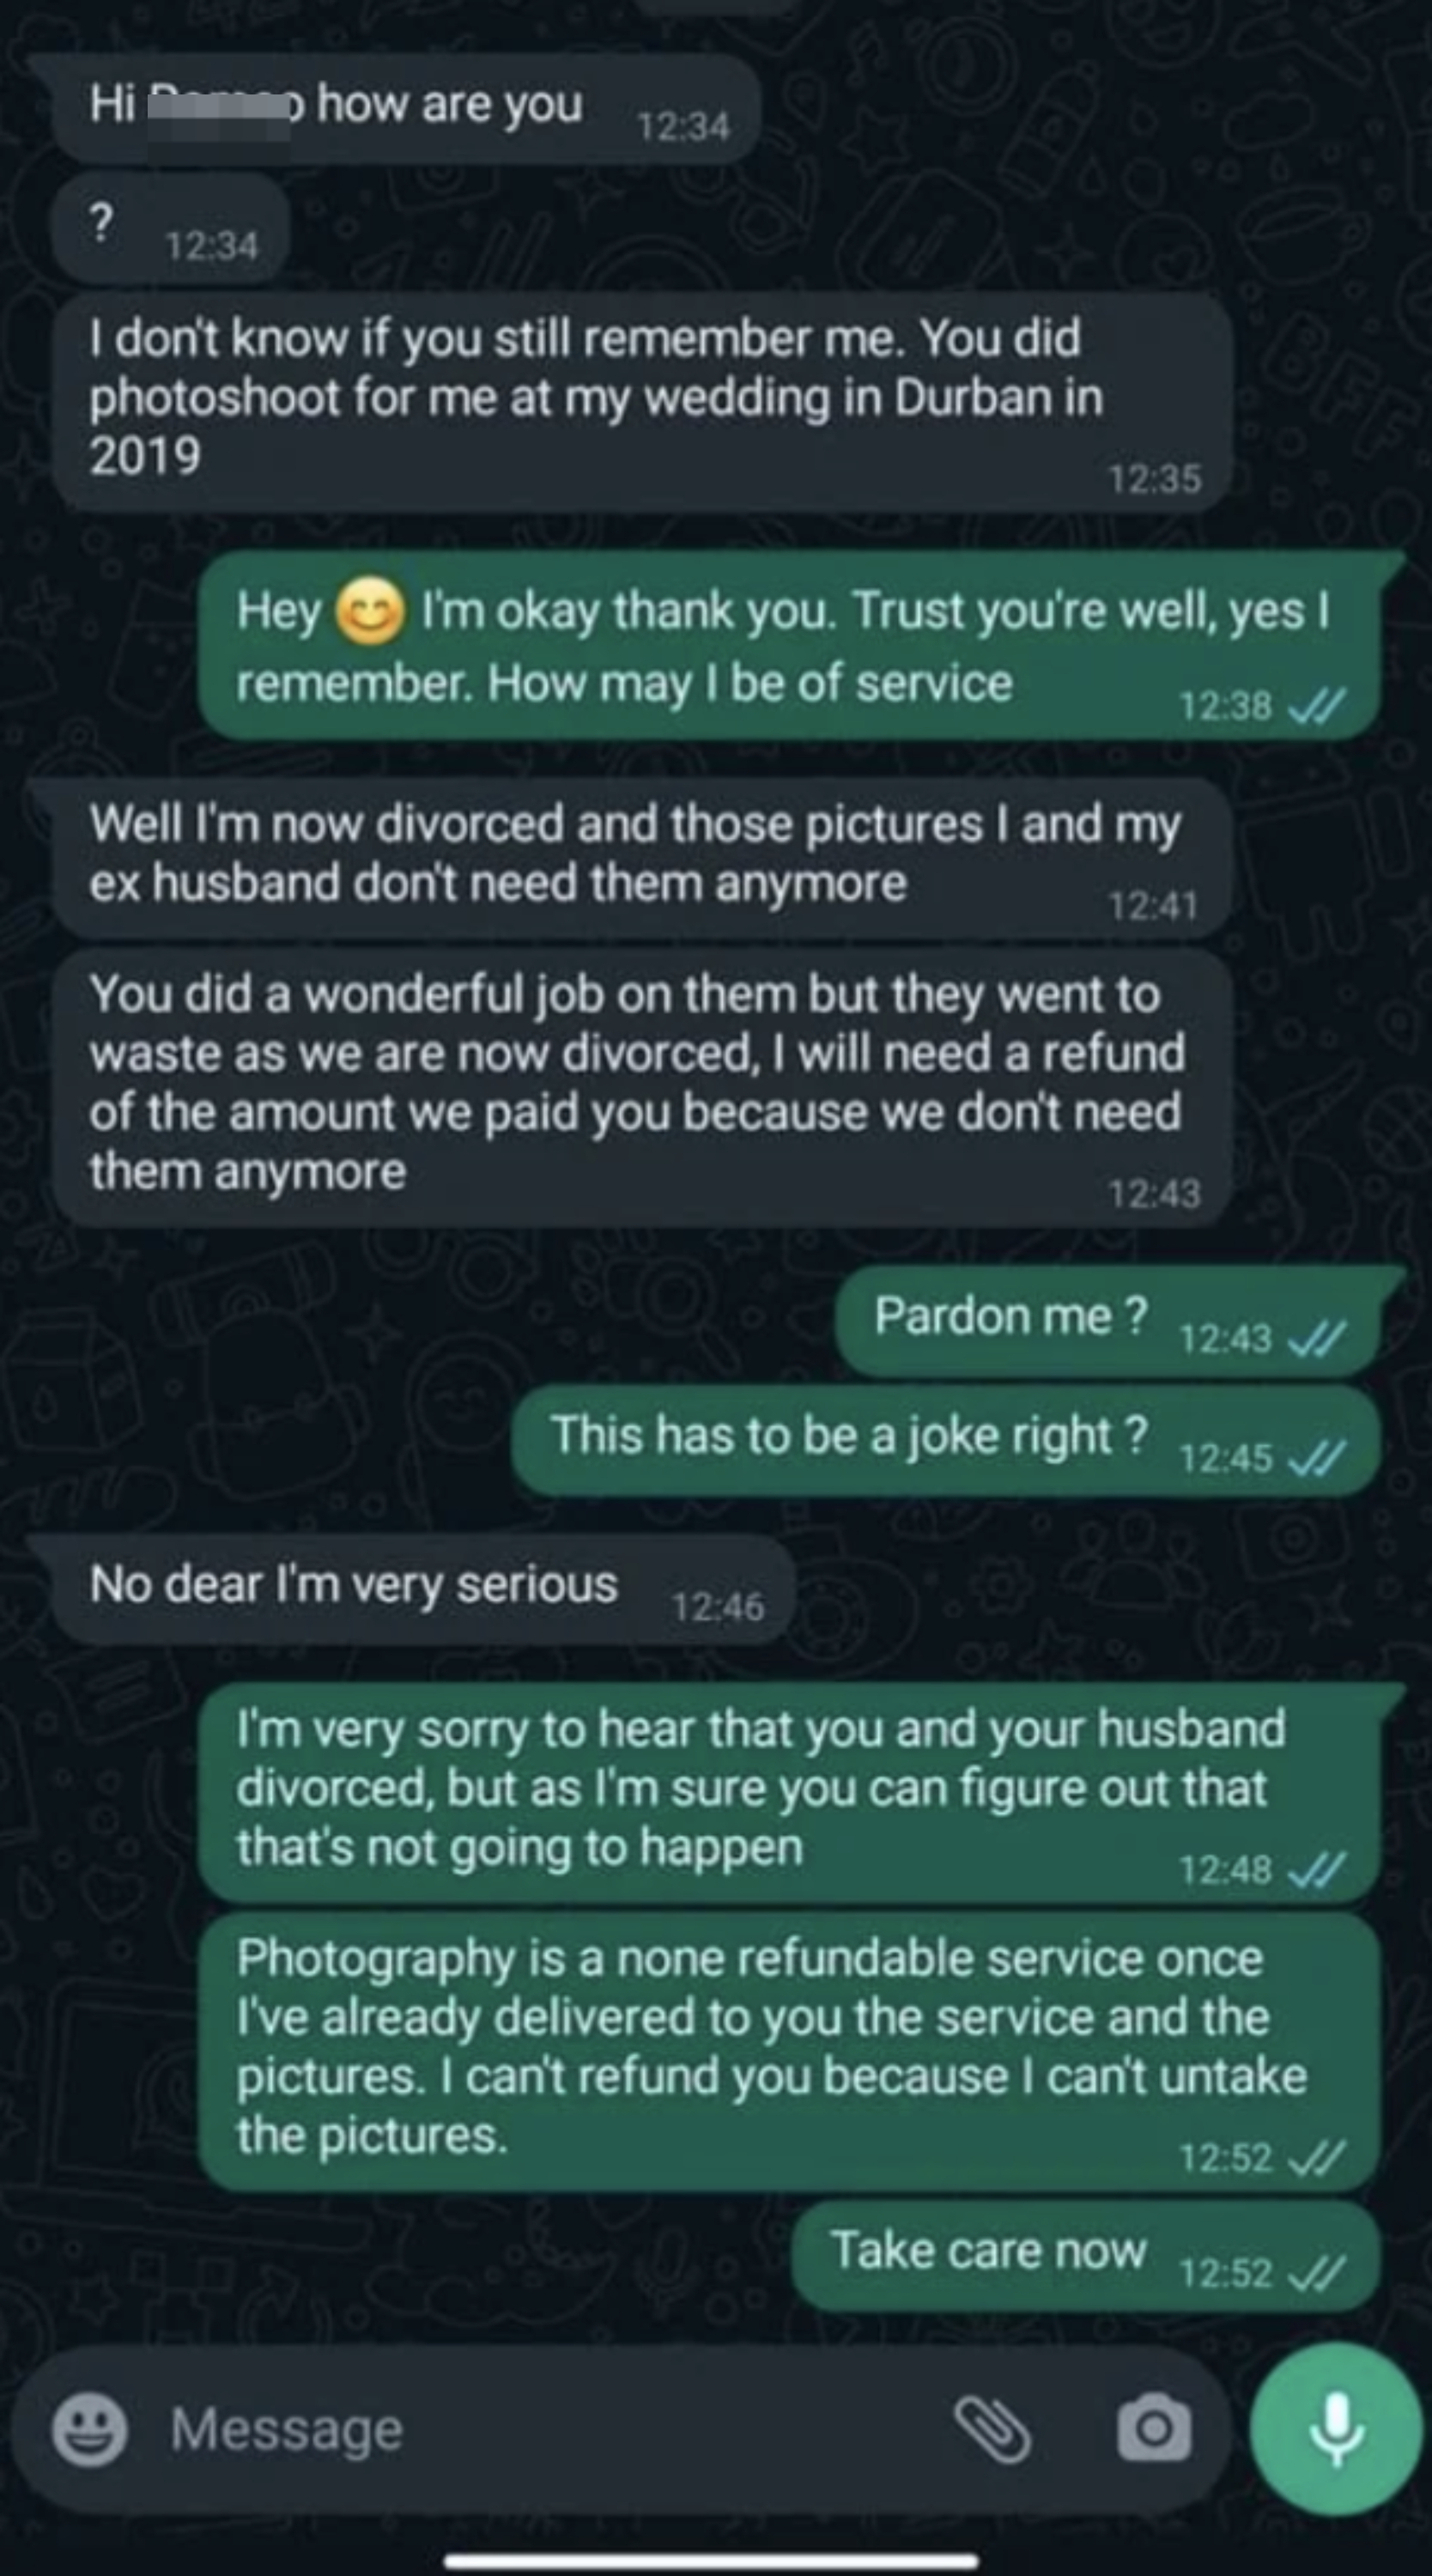 Chat screenshots showing a conversation about dissatisfaction with wedding photos and a refusal to refund